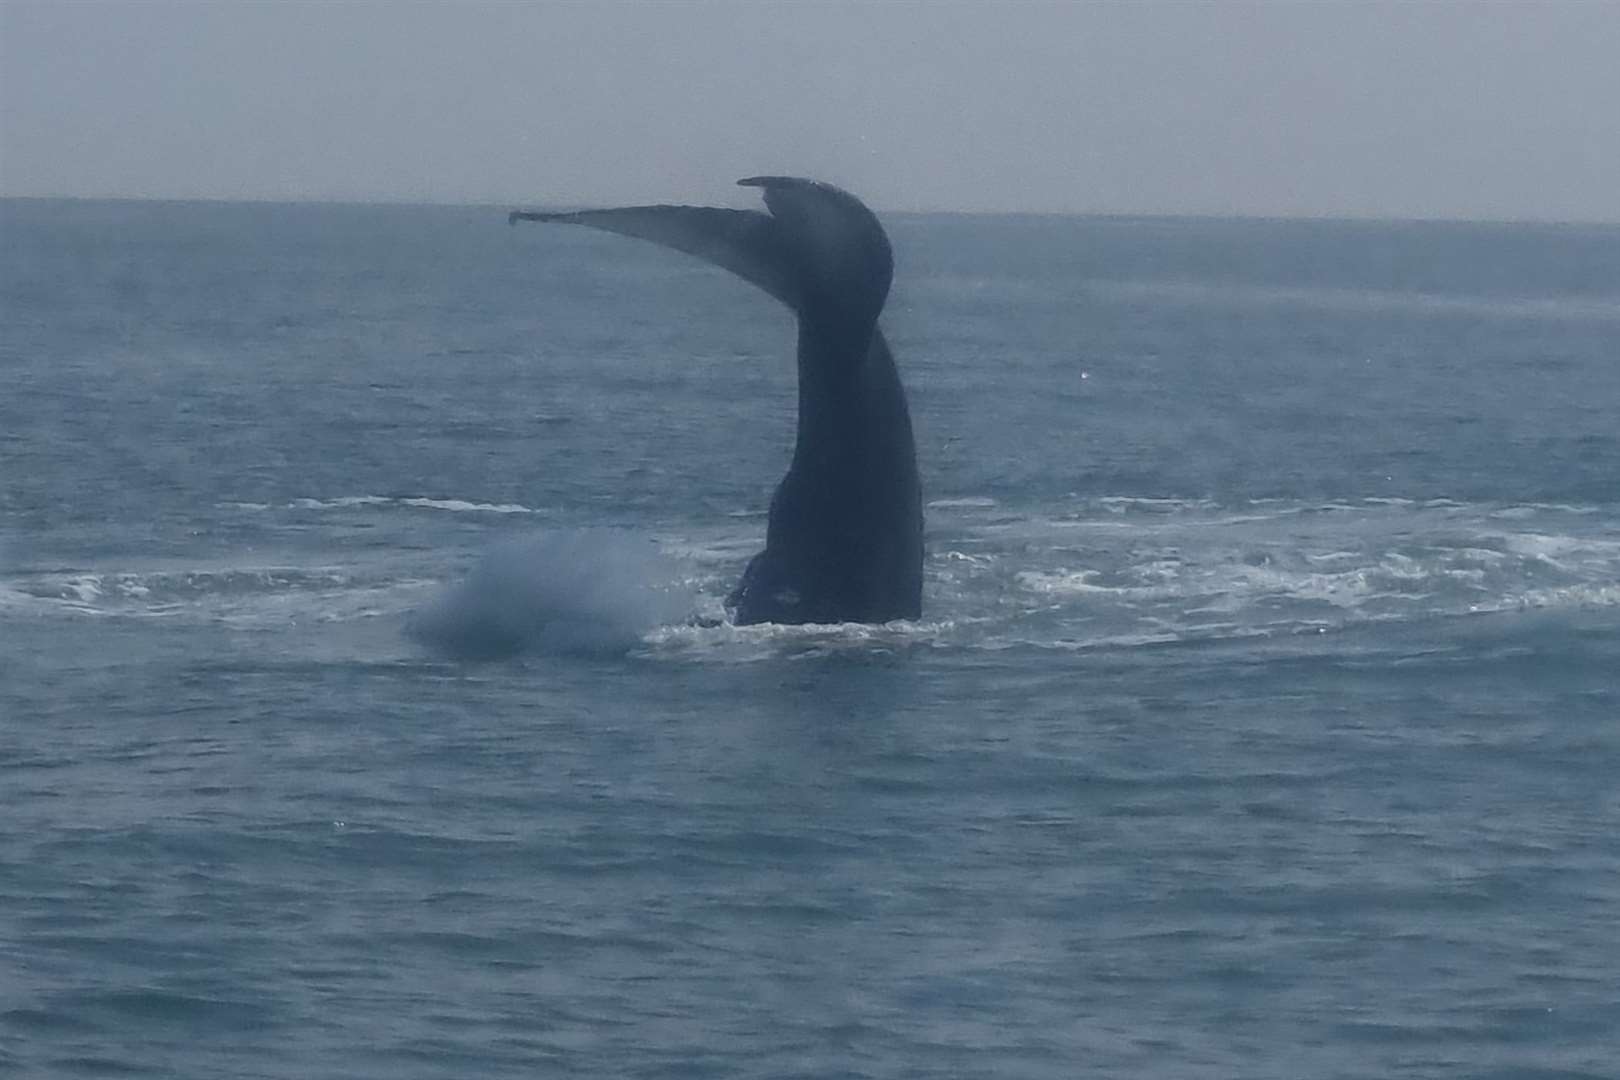 Thought to be a Humpback Whale, it was seen in the English Channel between Dover and Folkestone. Picture: Thomas Packman